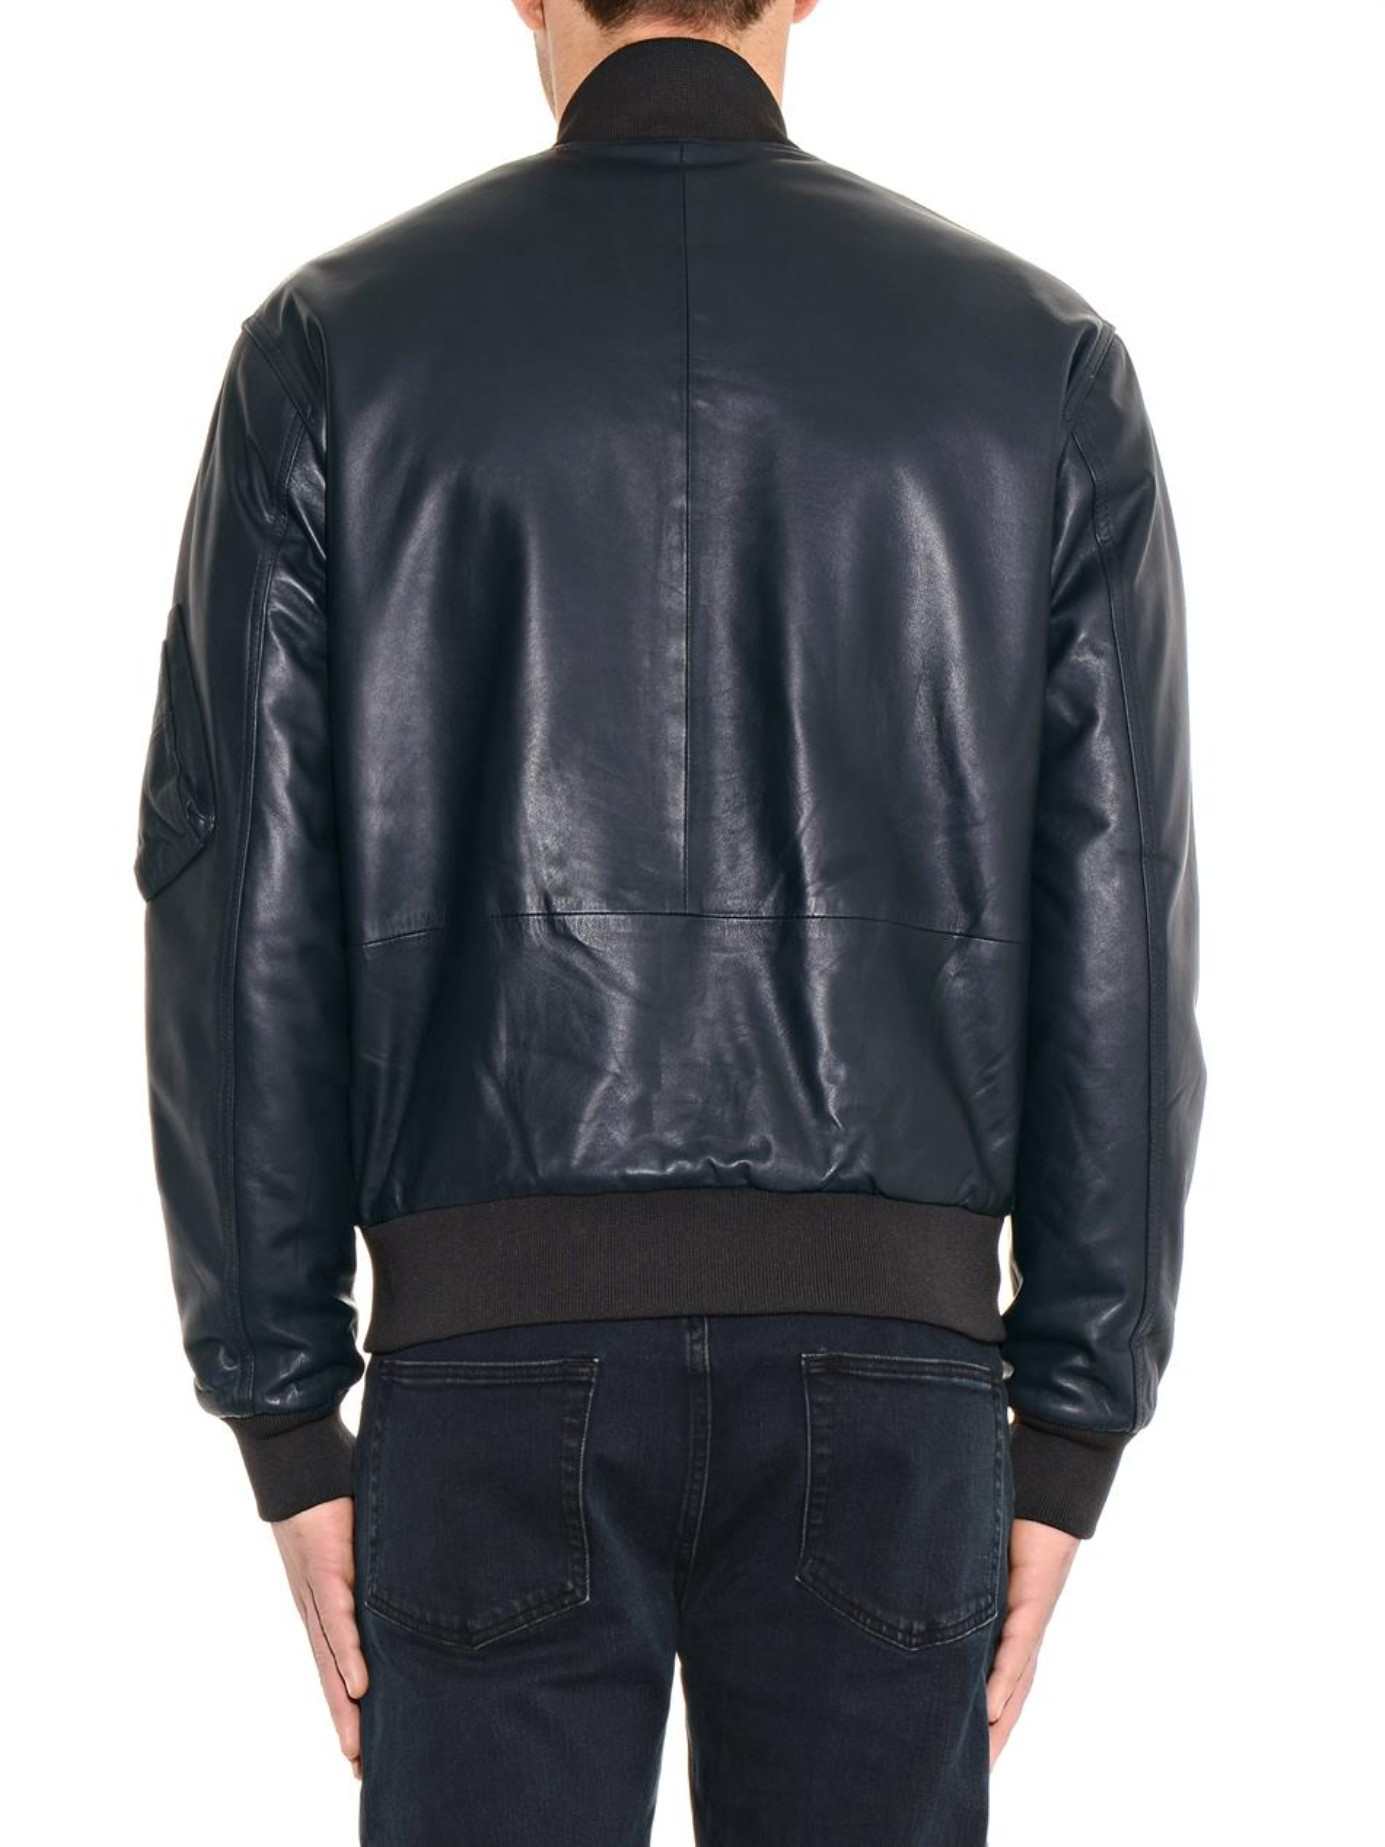 Lyst - McQ Leather Bomber Jacket in Blue for Men